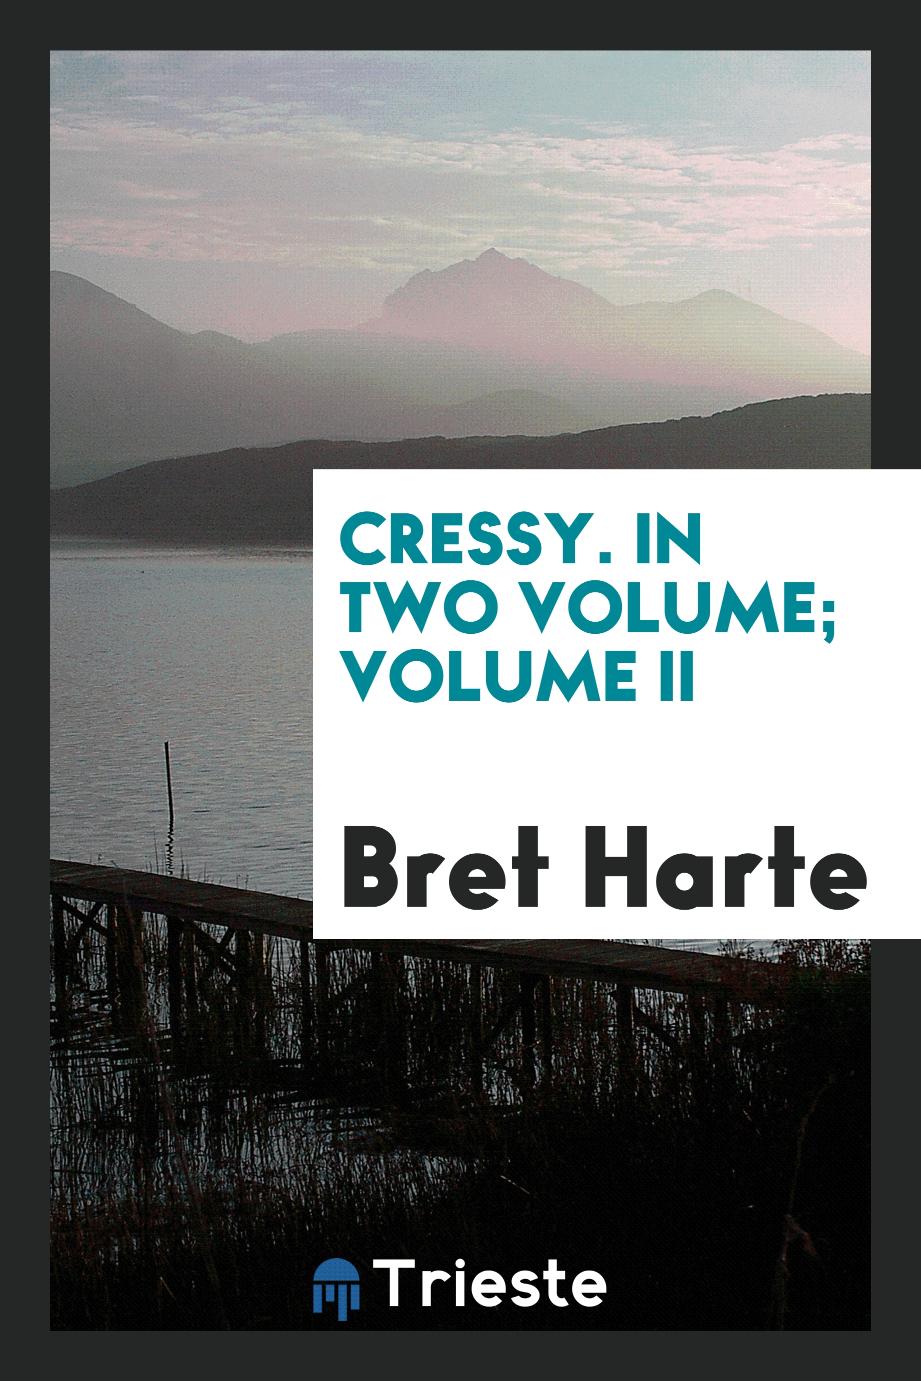 Cressy. In two volume; volume II